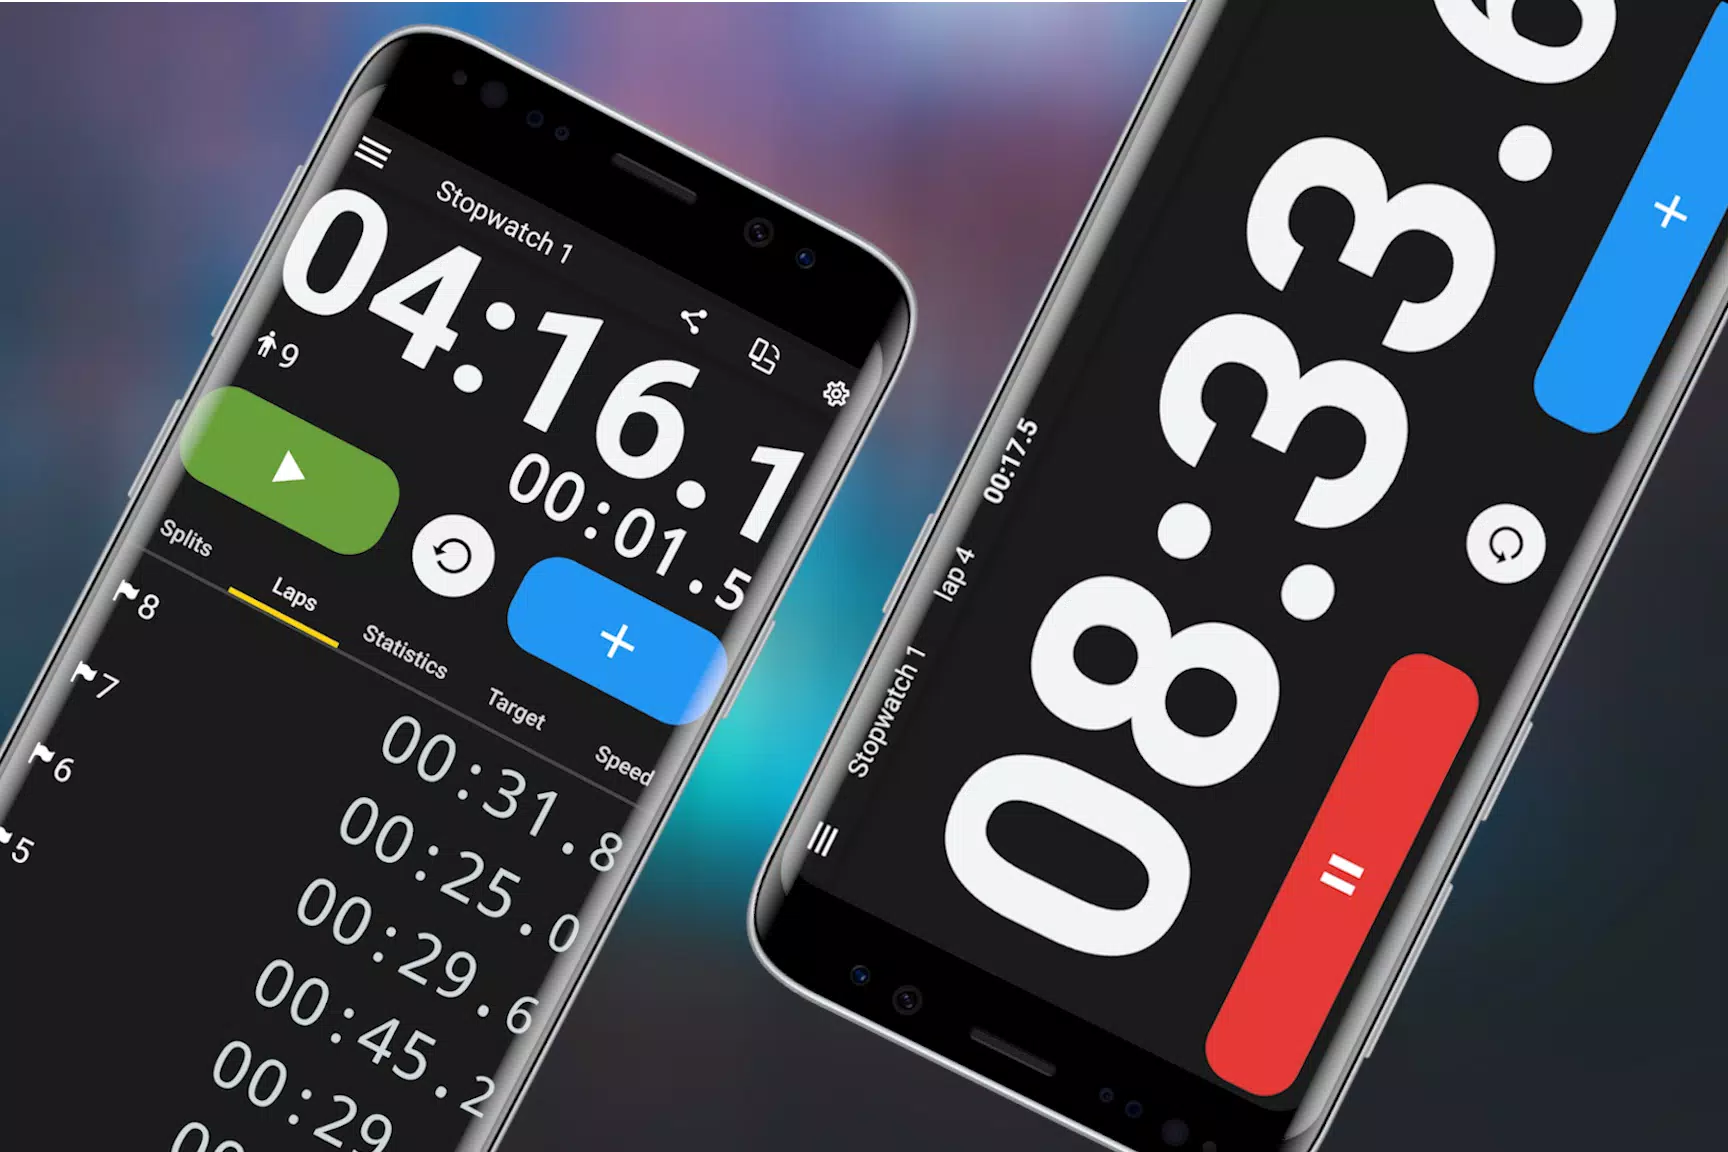 Multi Stopwatch & Timer::Appstore for Android